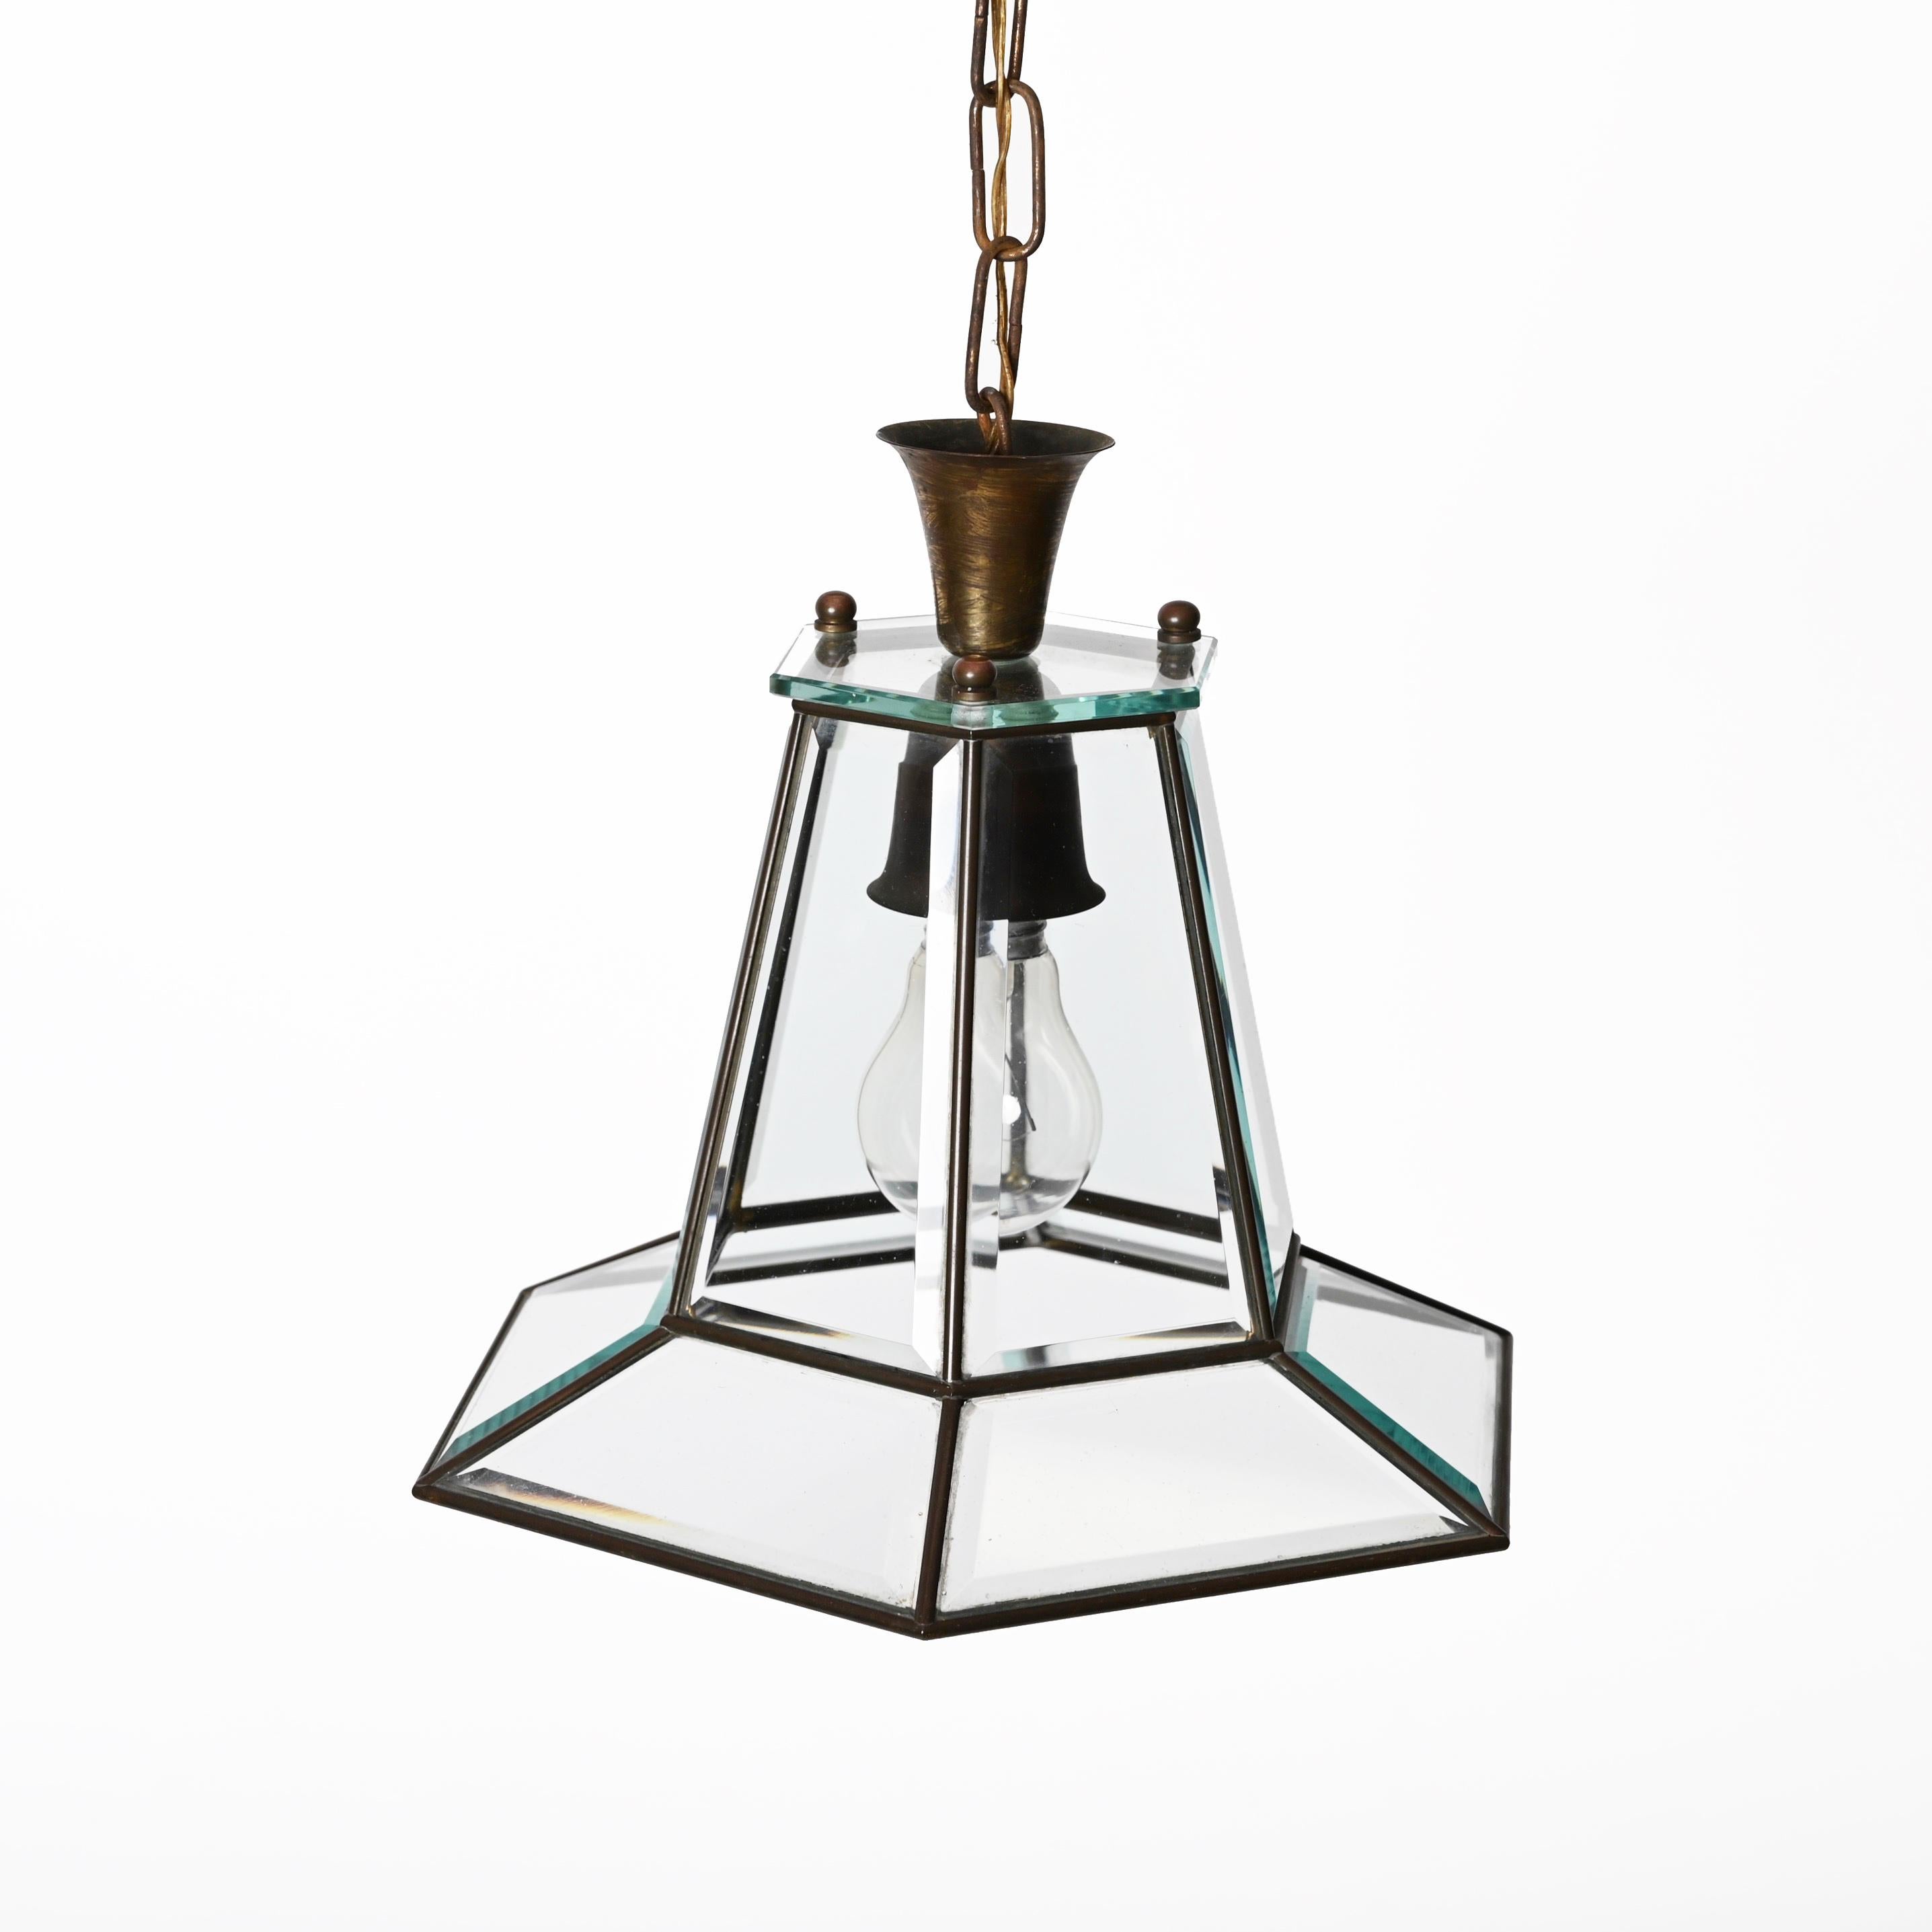 Brass and Beveled Glass Hexagonal Italian Chandelier After Adolf Loos, 1950s For Sale 3